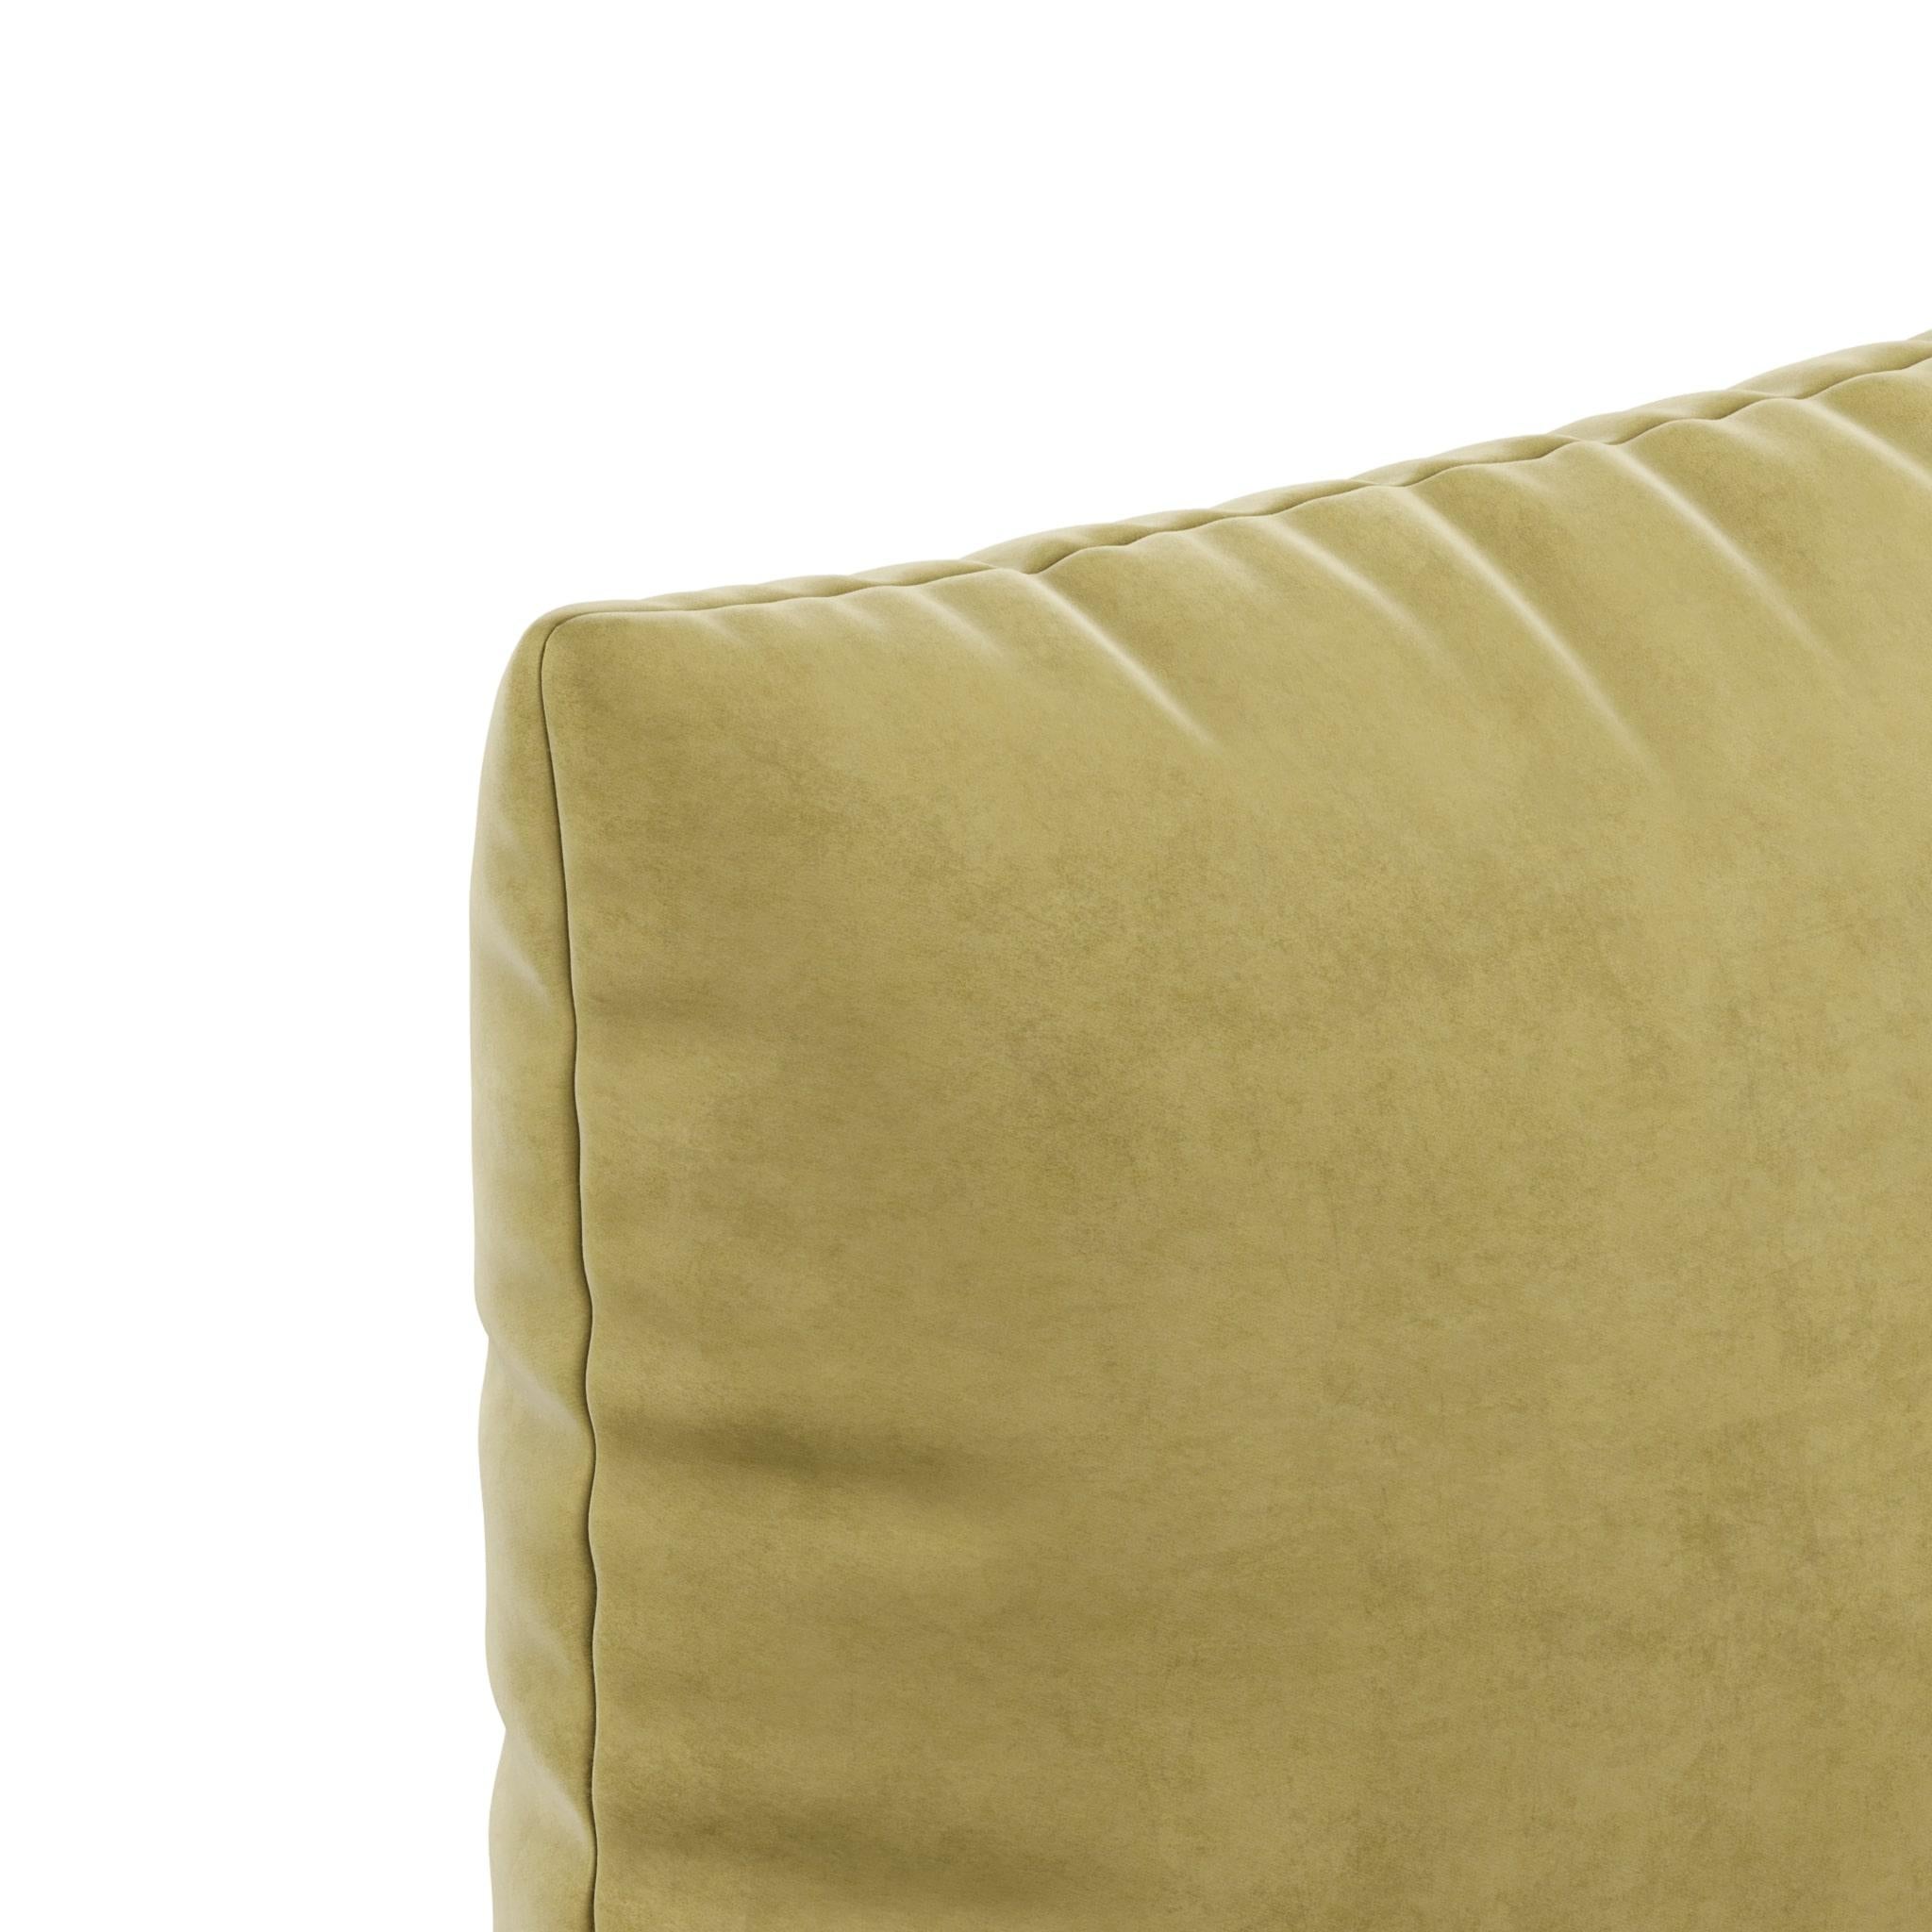 Mud velvet cushion is a square green pillow with a delicate touch. The earthy color combined with the soft textures will take you to somewhere else. A tranquil and peaceful state of mind. It is the comfort piece that is missing in your sofa, chair